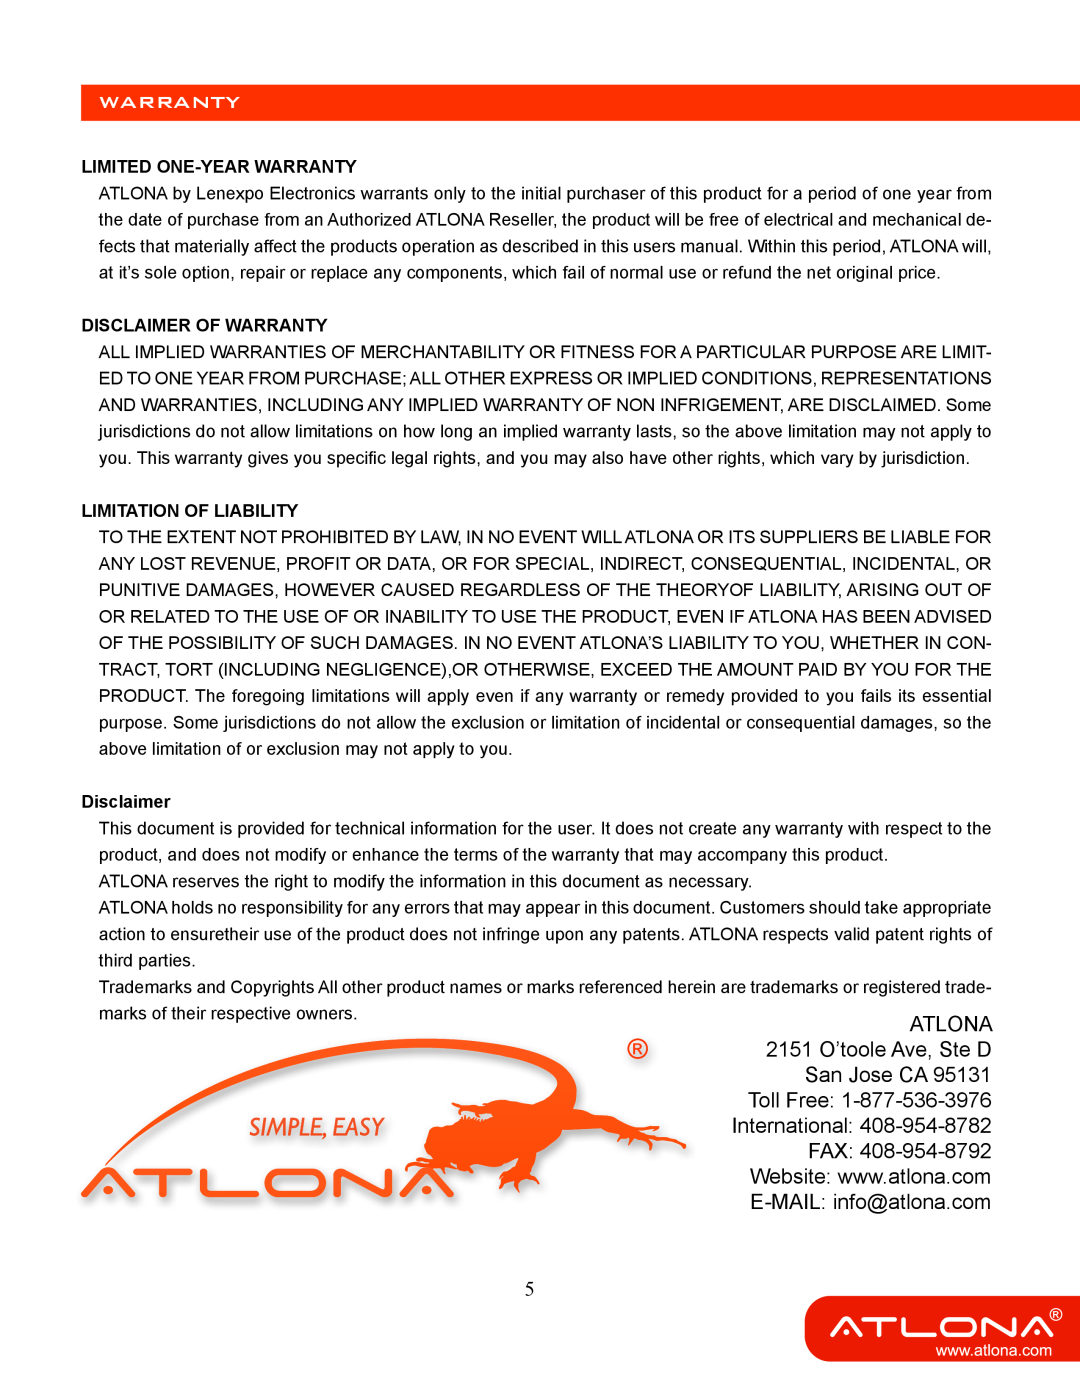 Atlona AT-HD570 user manual Limited One-Year Warranty, Disclaimer Of Warranty, Limitation Of Liability 